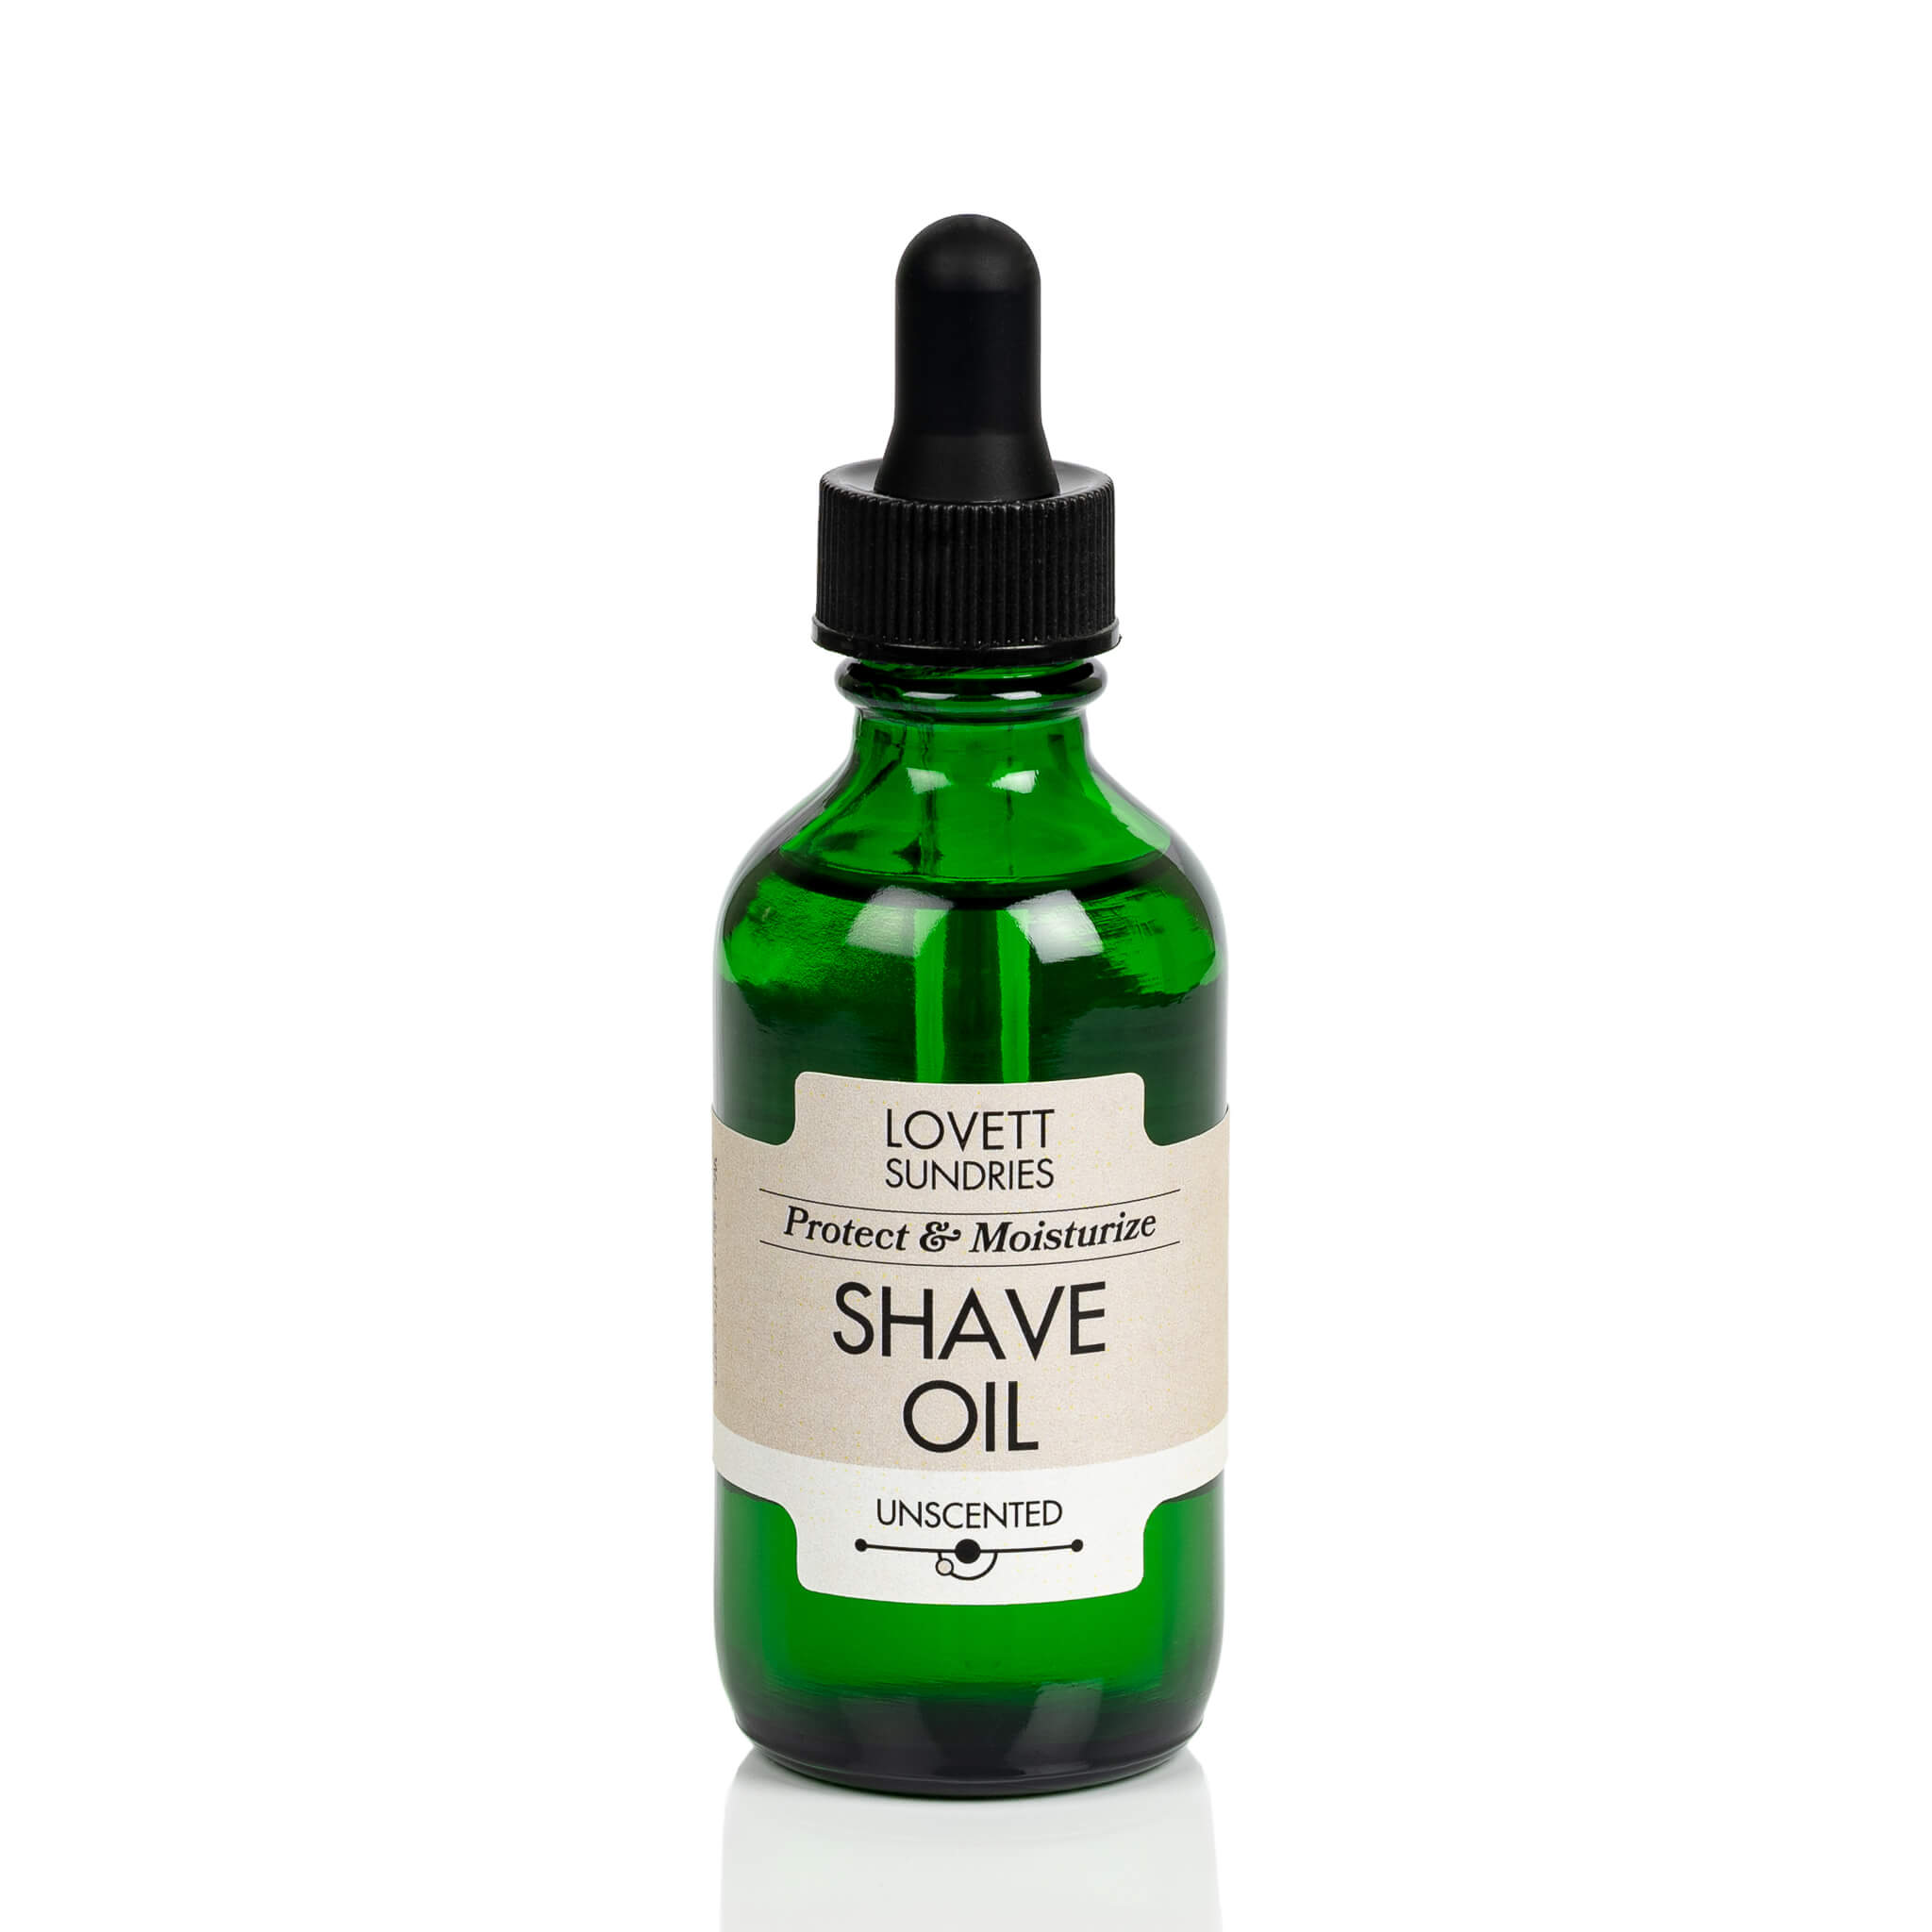 All natural moisturizing and protective unscented shave oil in a green glass bottle with a dropper. 